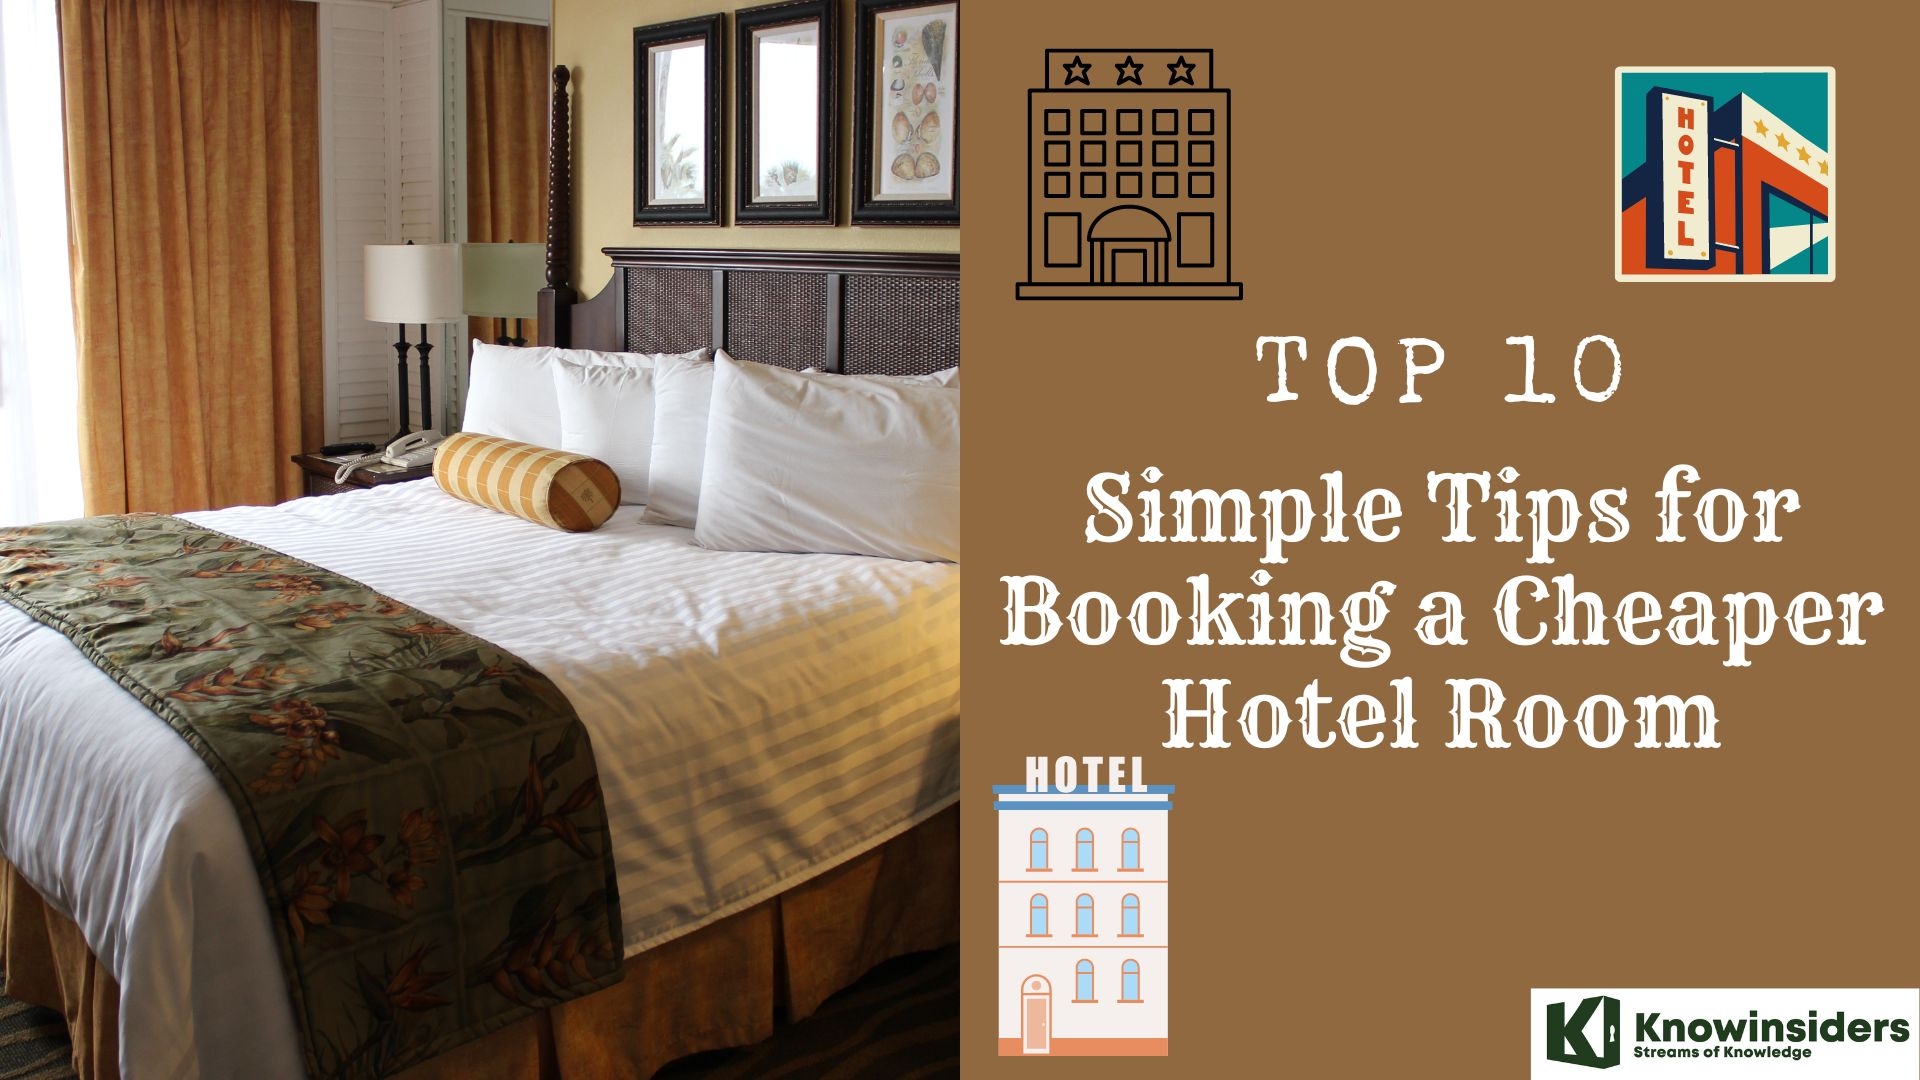 Top 10 Simple Tips for Booking a Cheaper Hotel Room Knowinsiders.com 